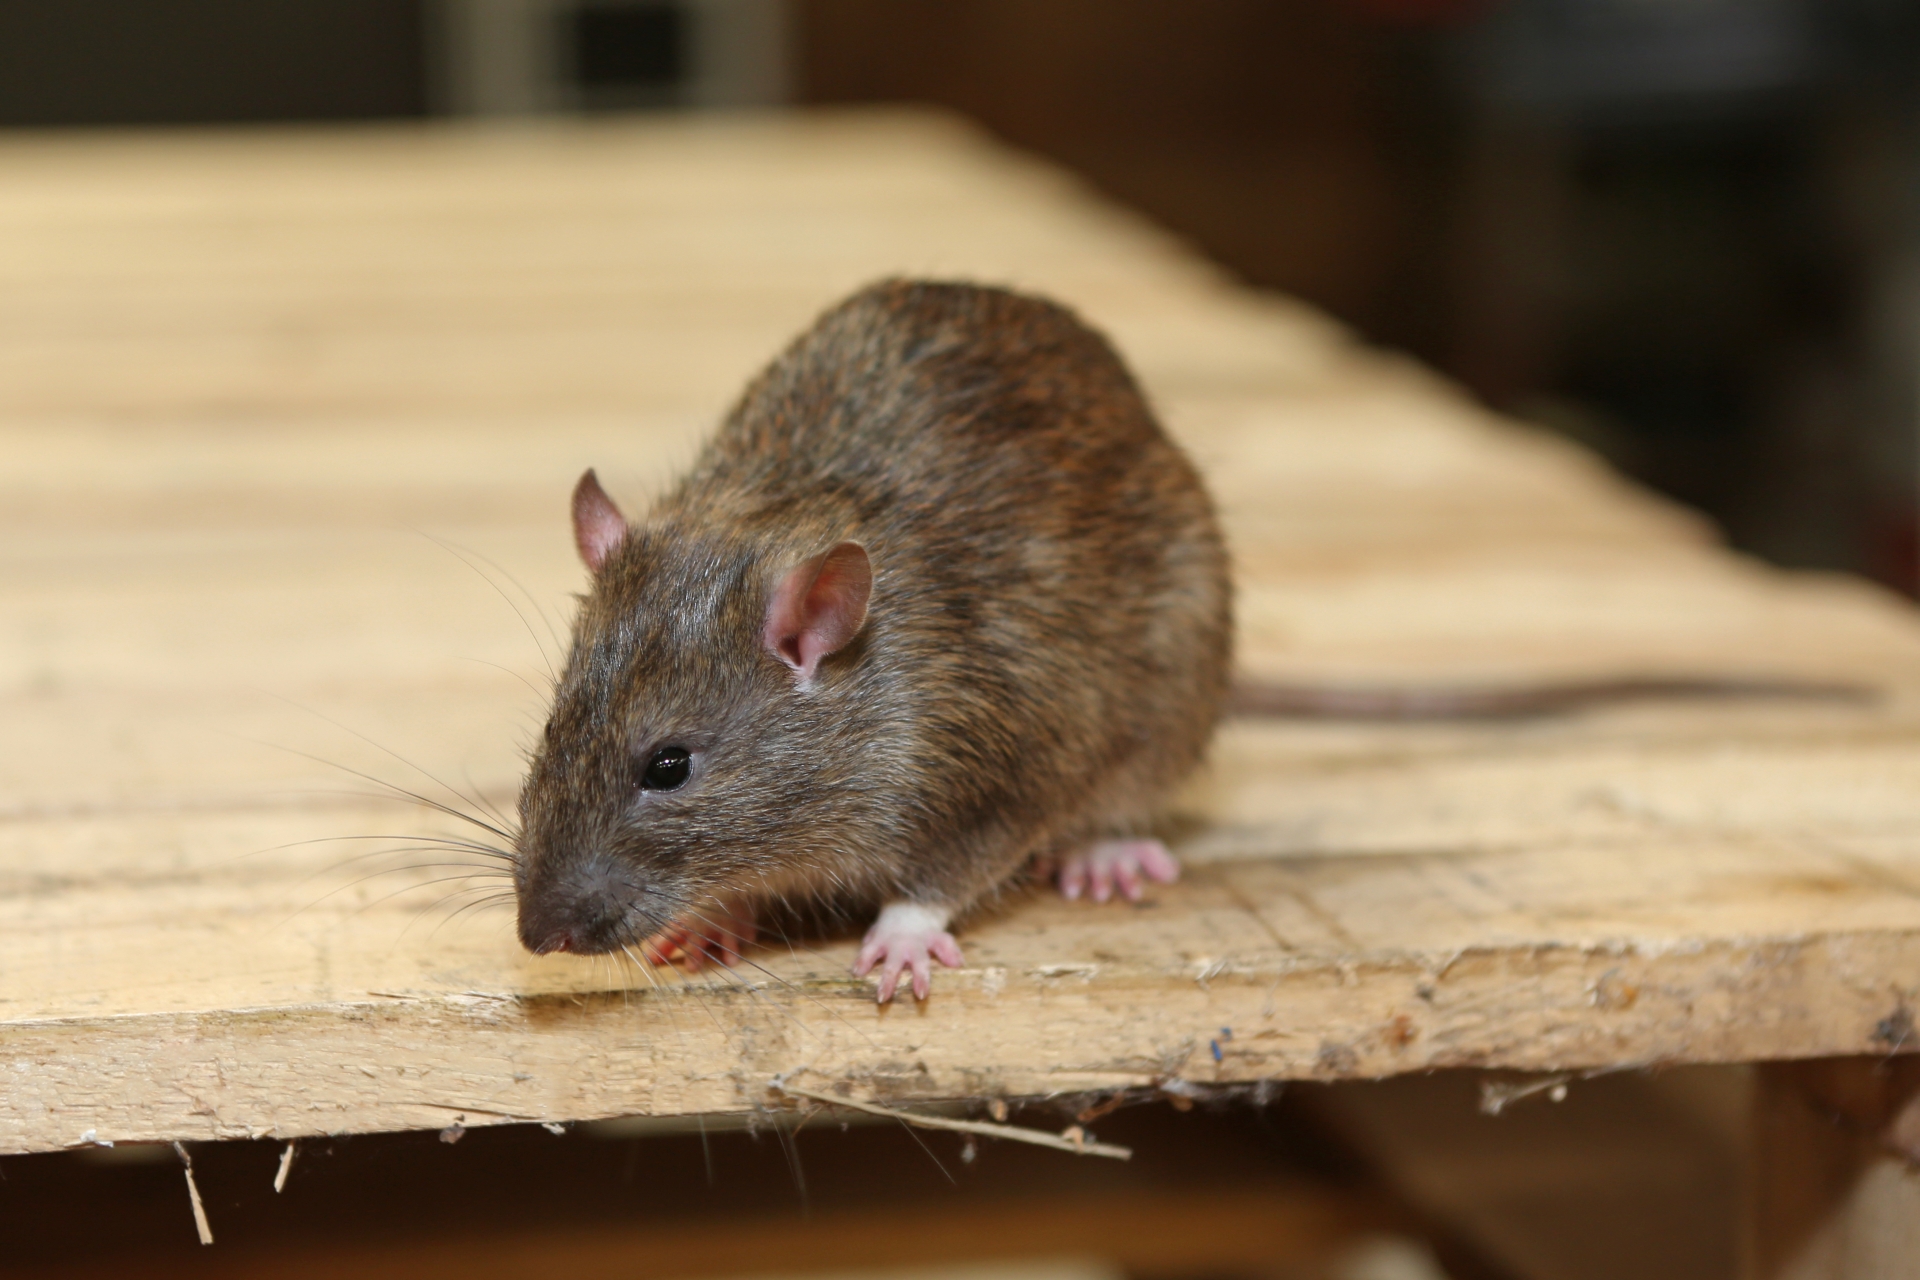 Rat Infestation, Pest Control in North Feltham, East Bedfont, TW14. Call Now 020 8166 9746